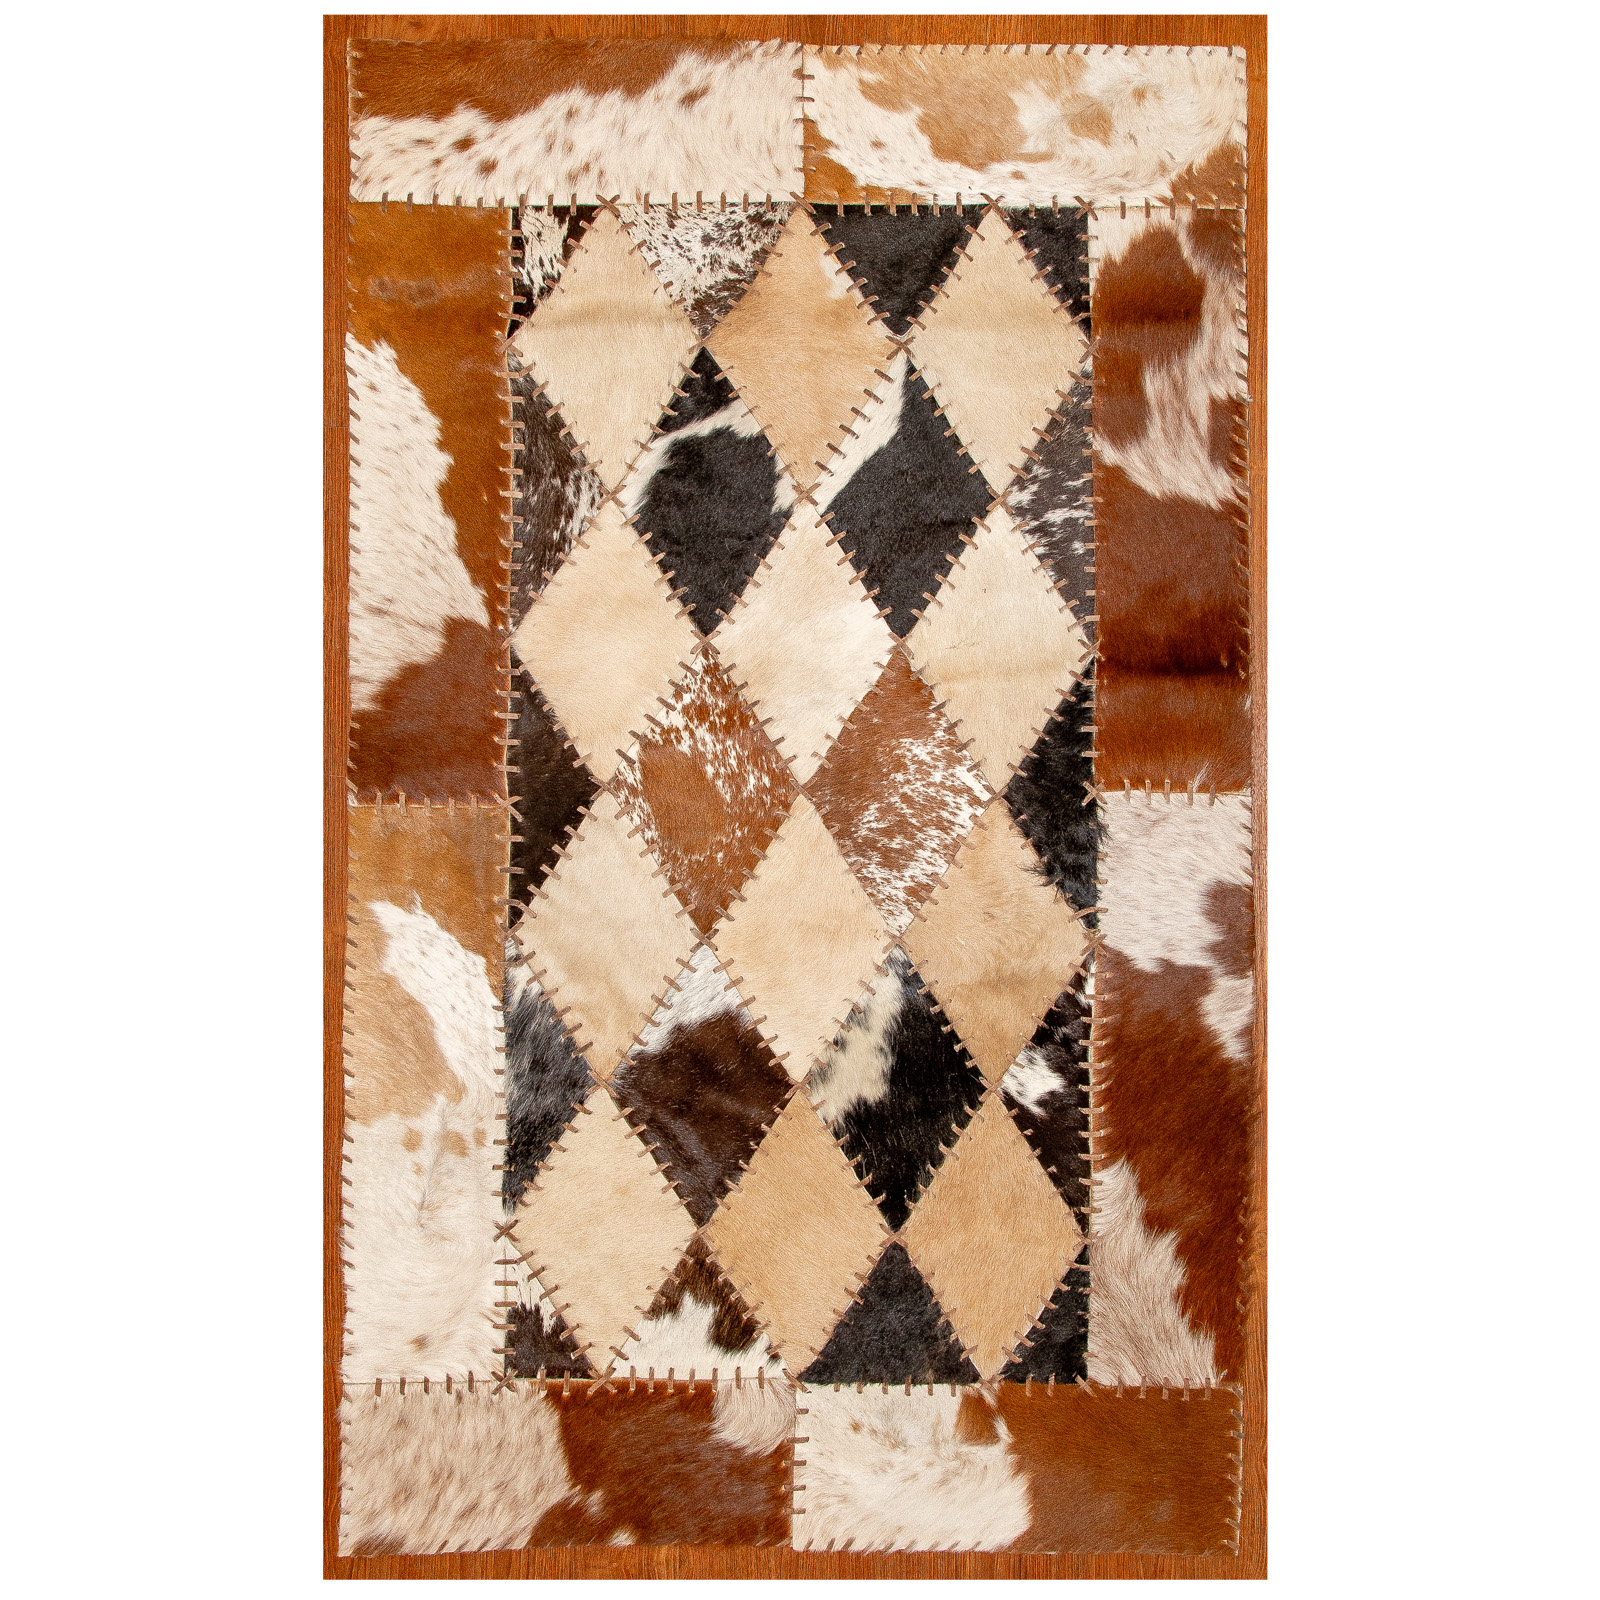 PATCHWORK COWHIDE RUG 3 X 4 10 28768a